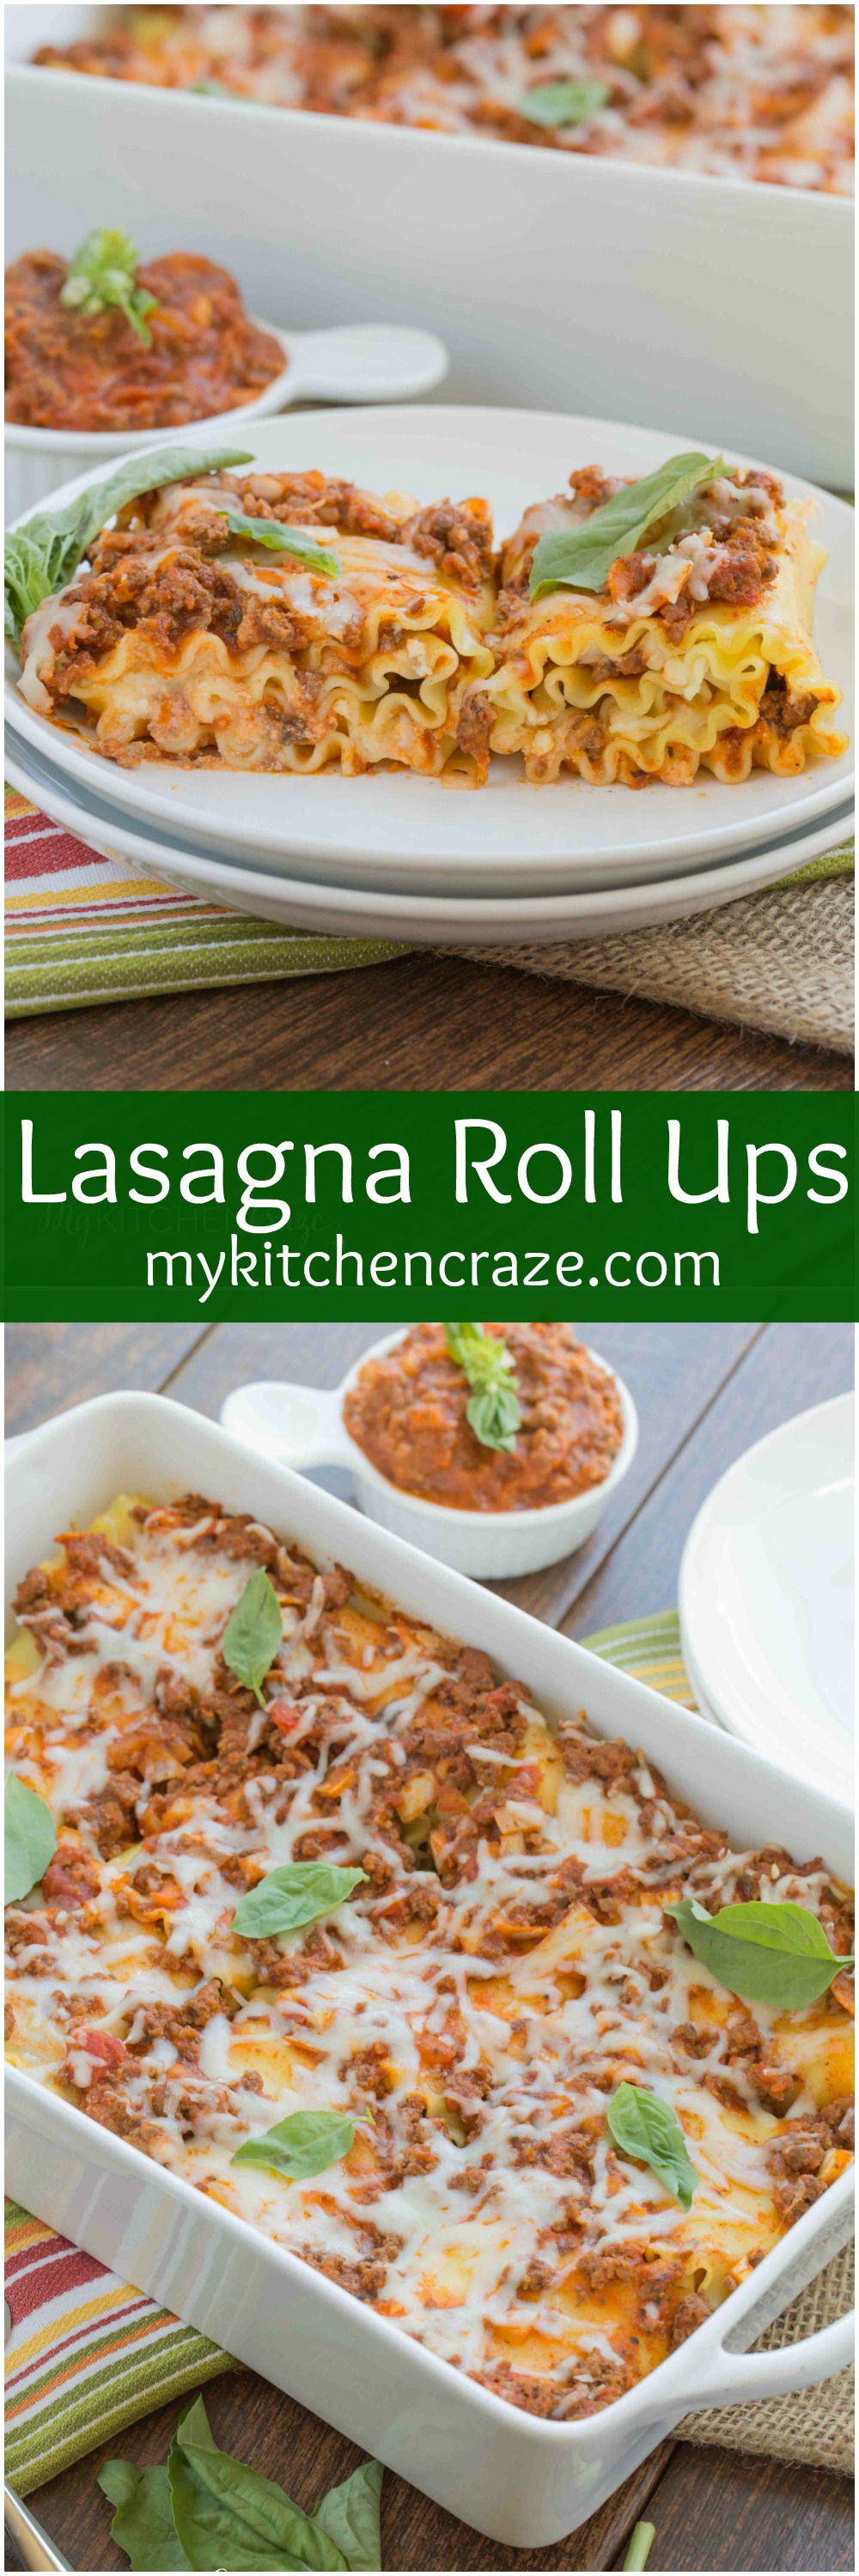 Lasagna Roll-Ups ~ mykitchencraze.com ~ A fun twist and easy way to make lasagna. These roll-ups are filled with everything you'd put in your lasagna, but better. The family will love them! 